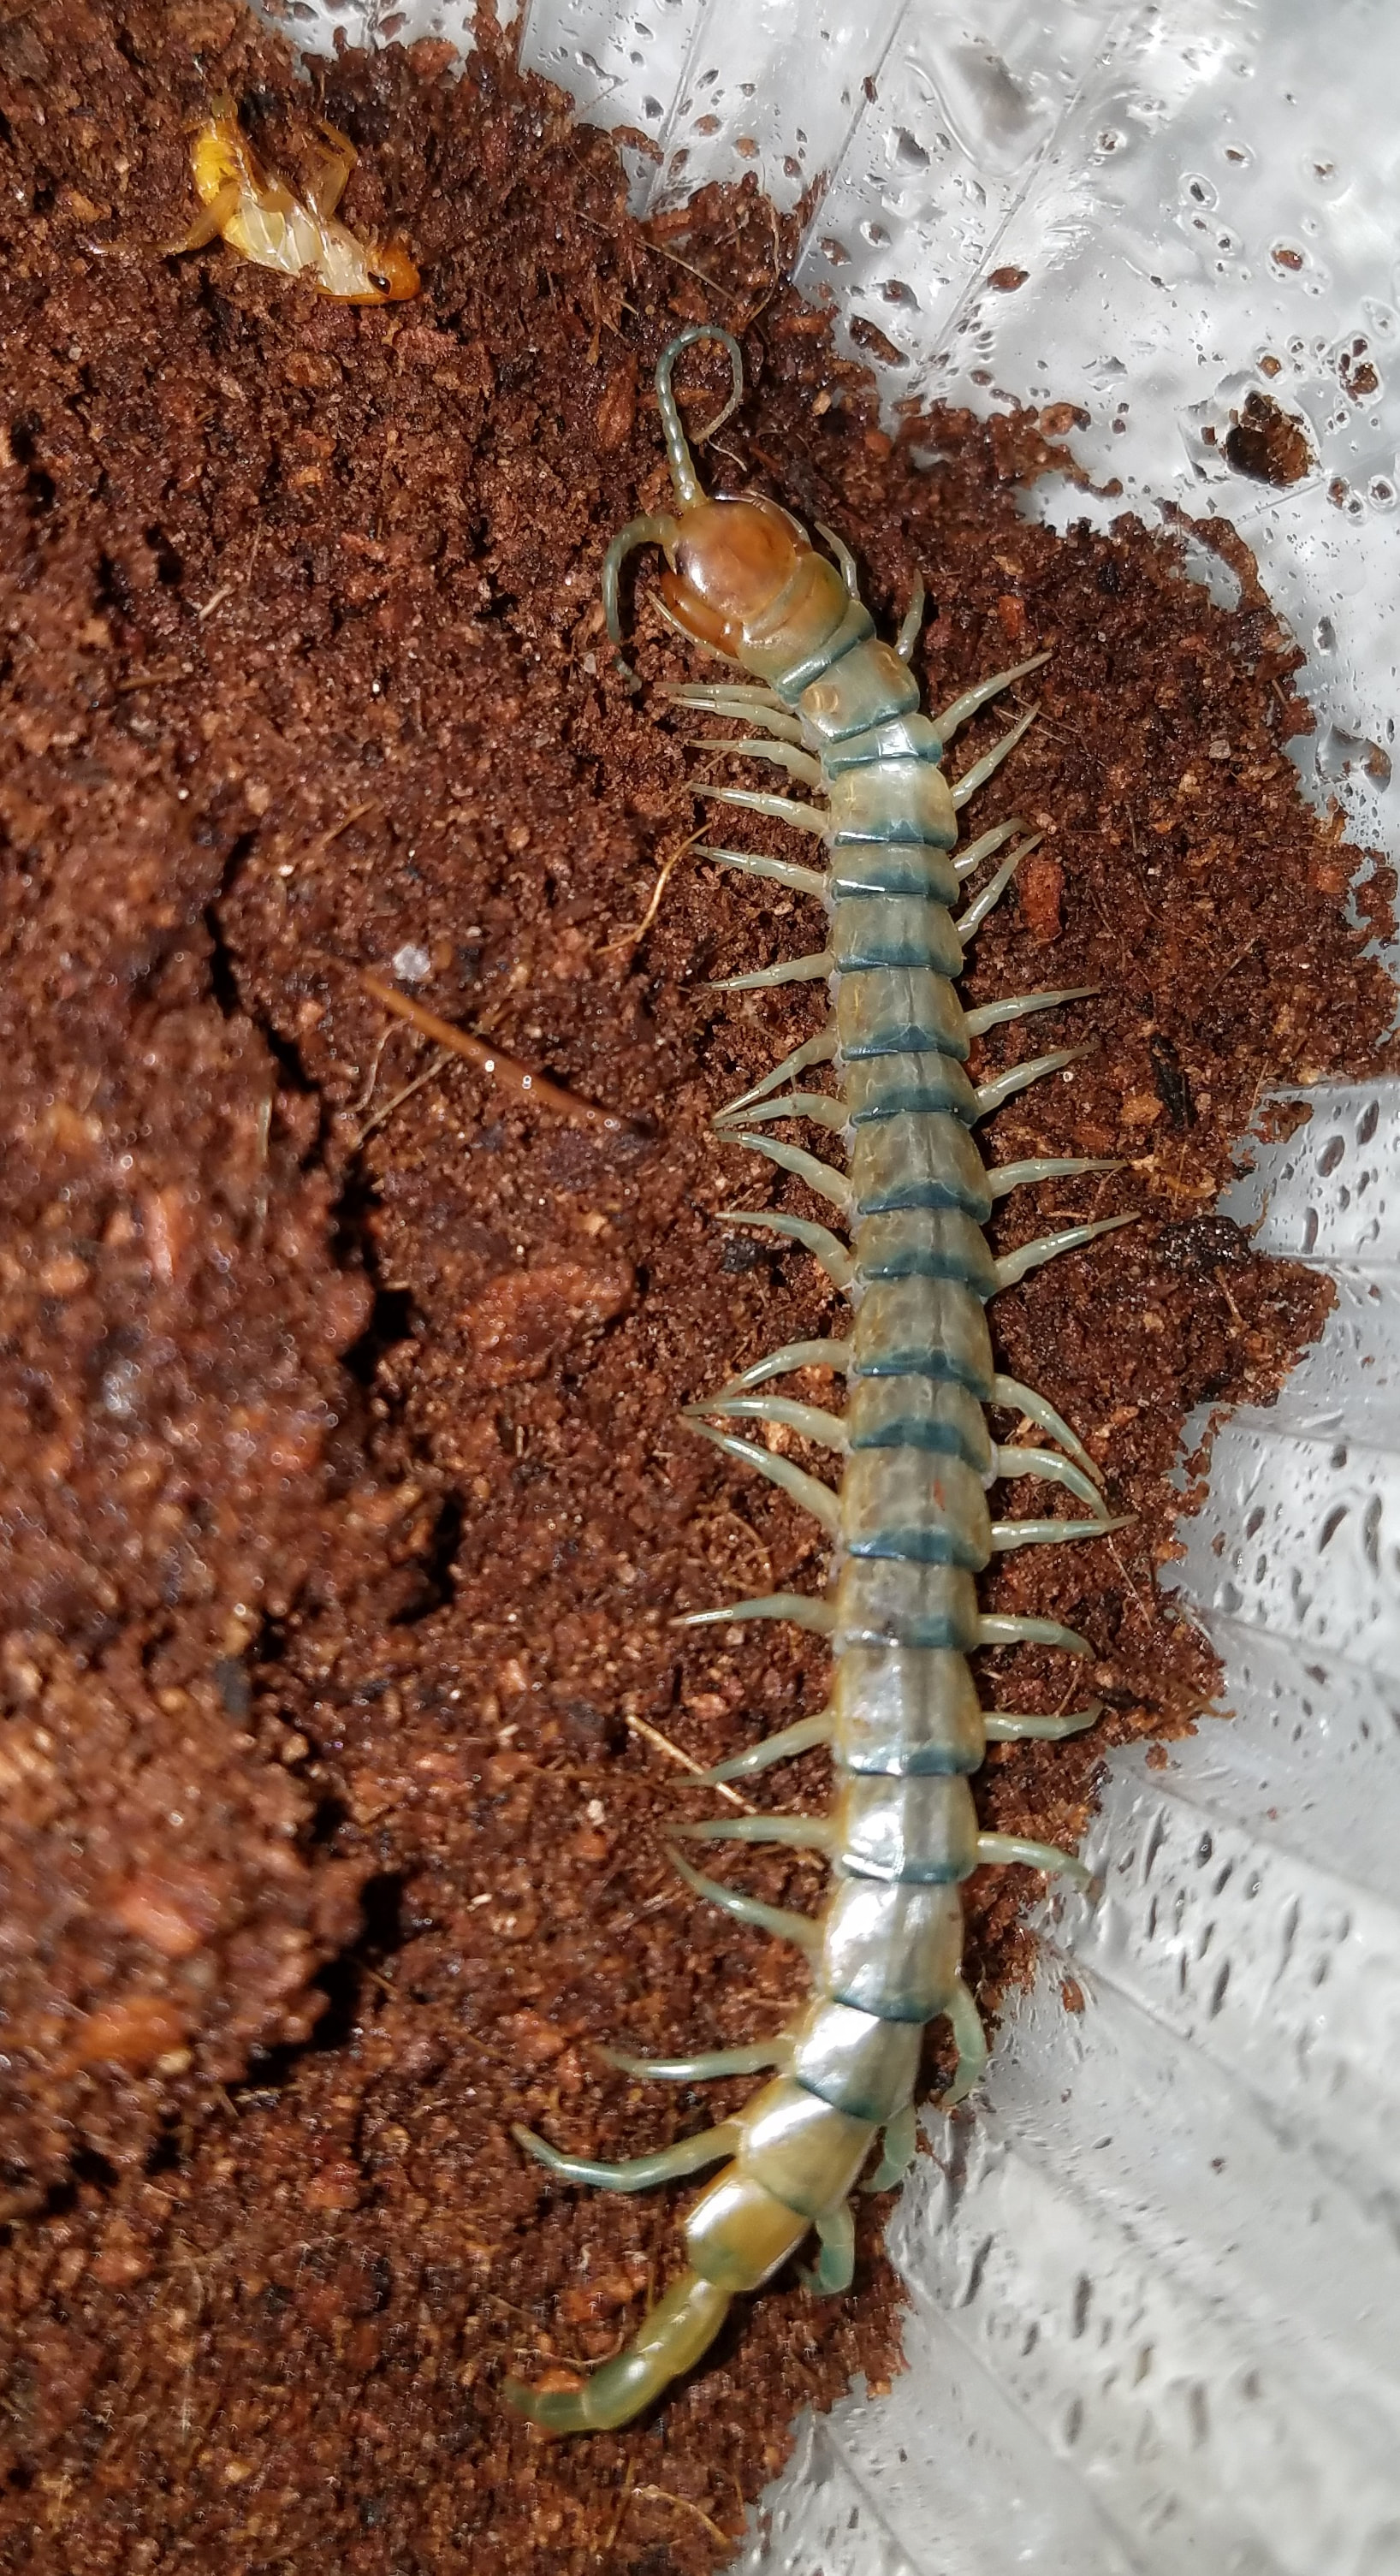 Scolopendra-polymorpha-for-sale